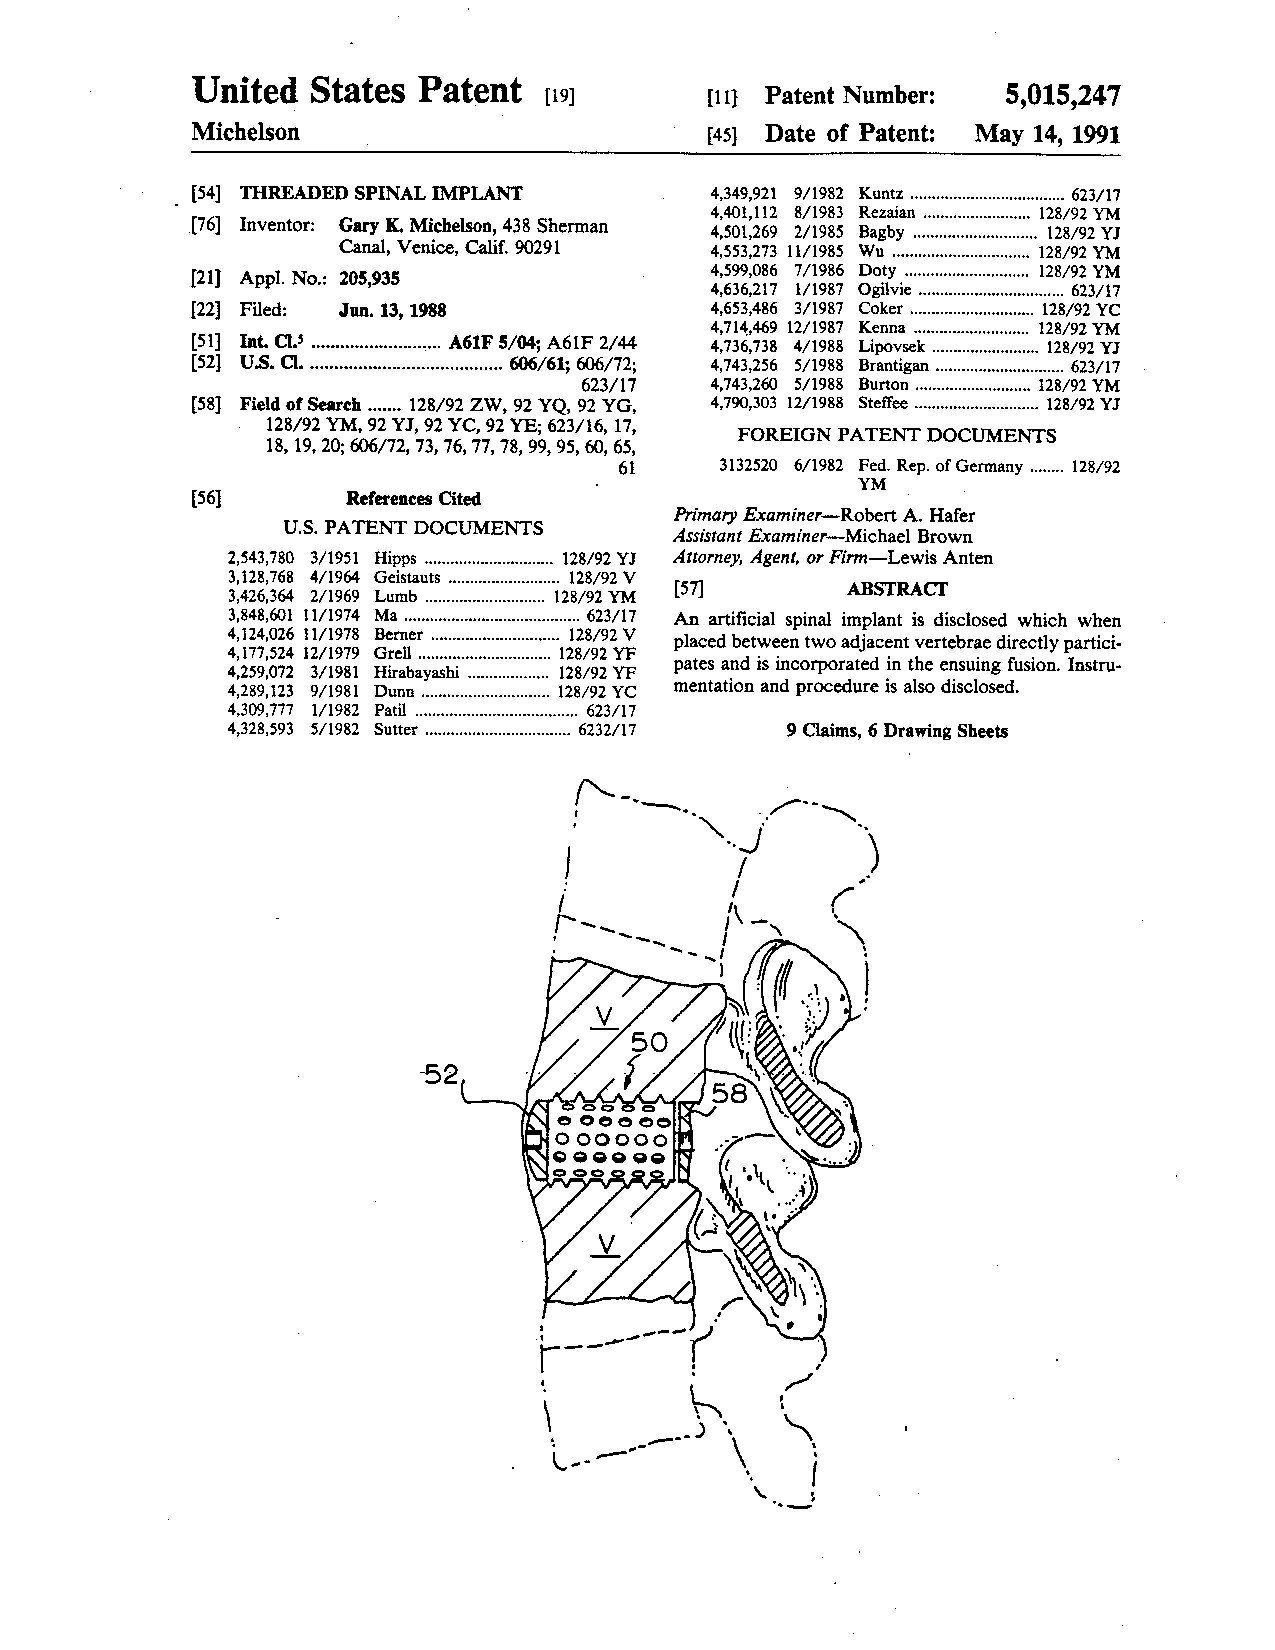 Threaded spinal implant - Patent 5,015,247